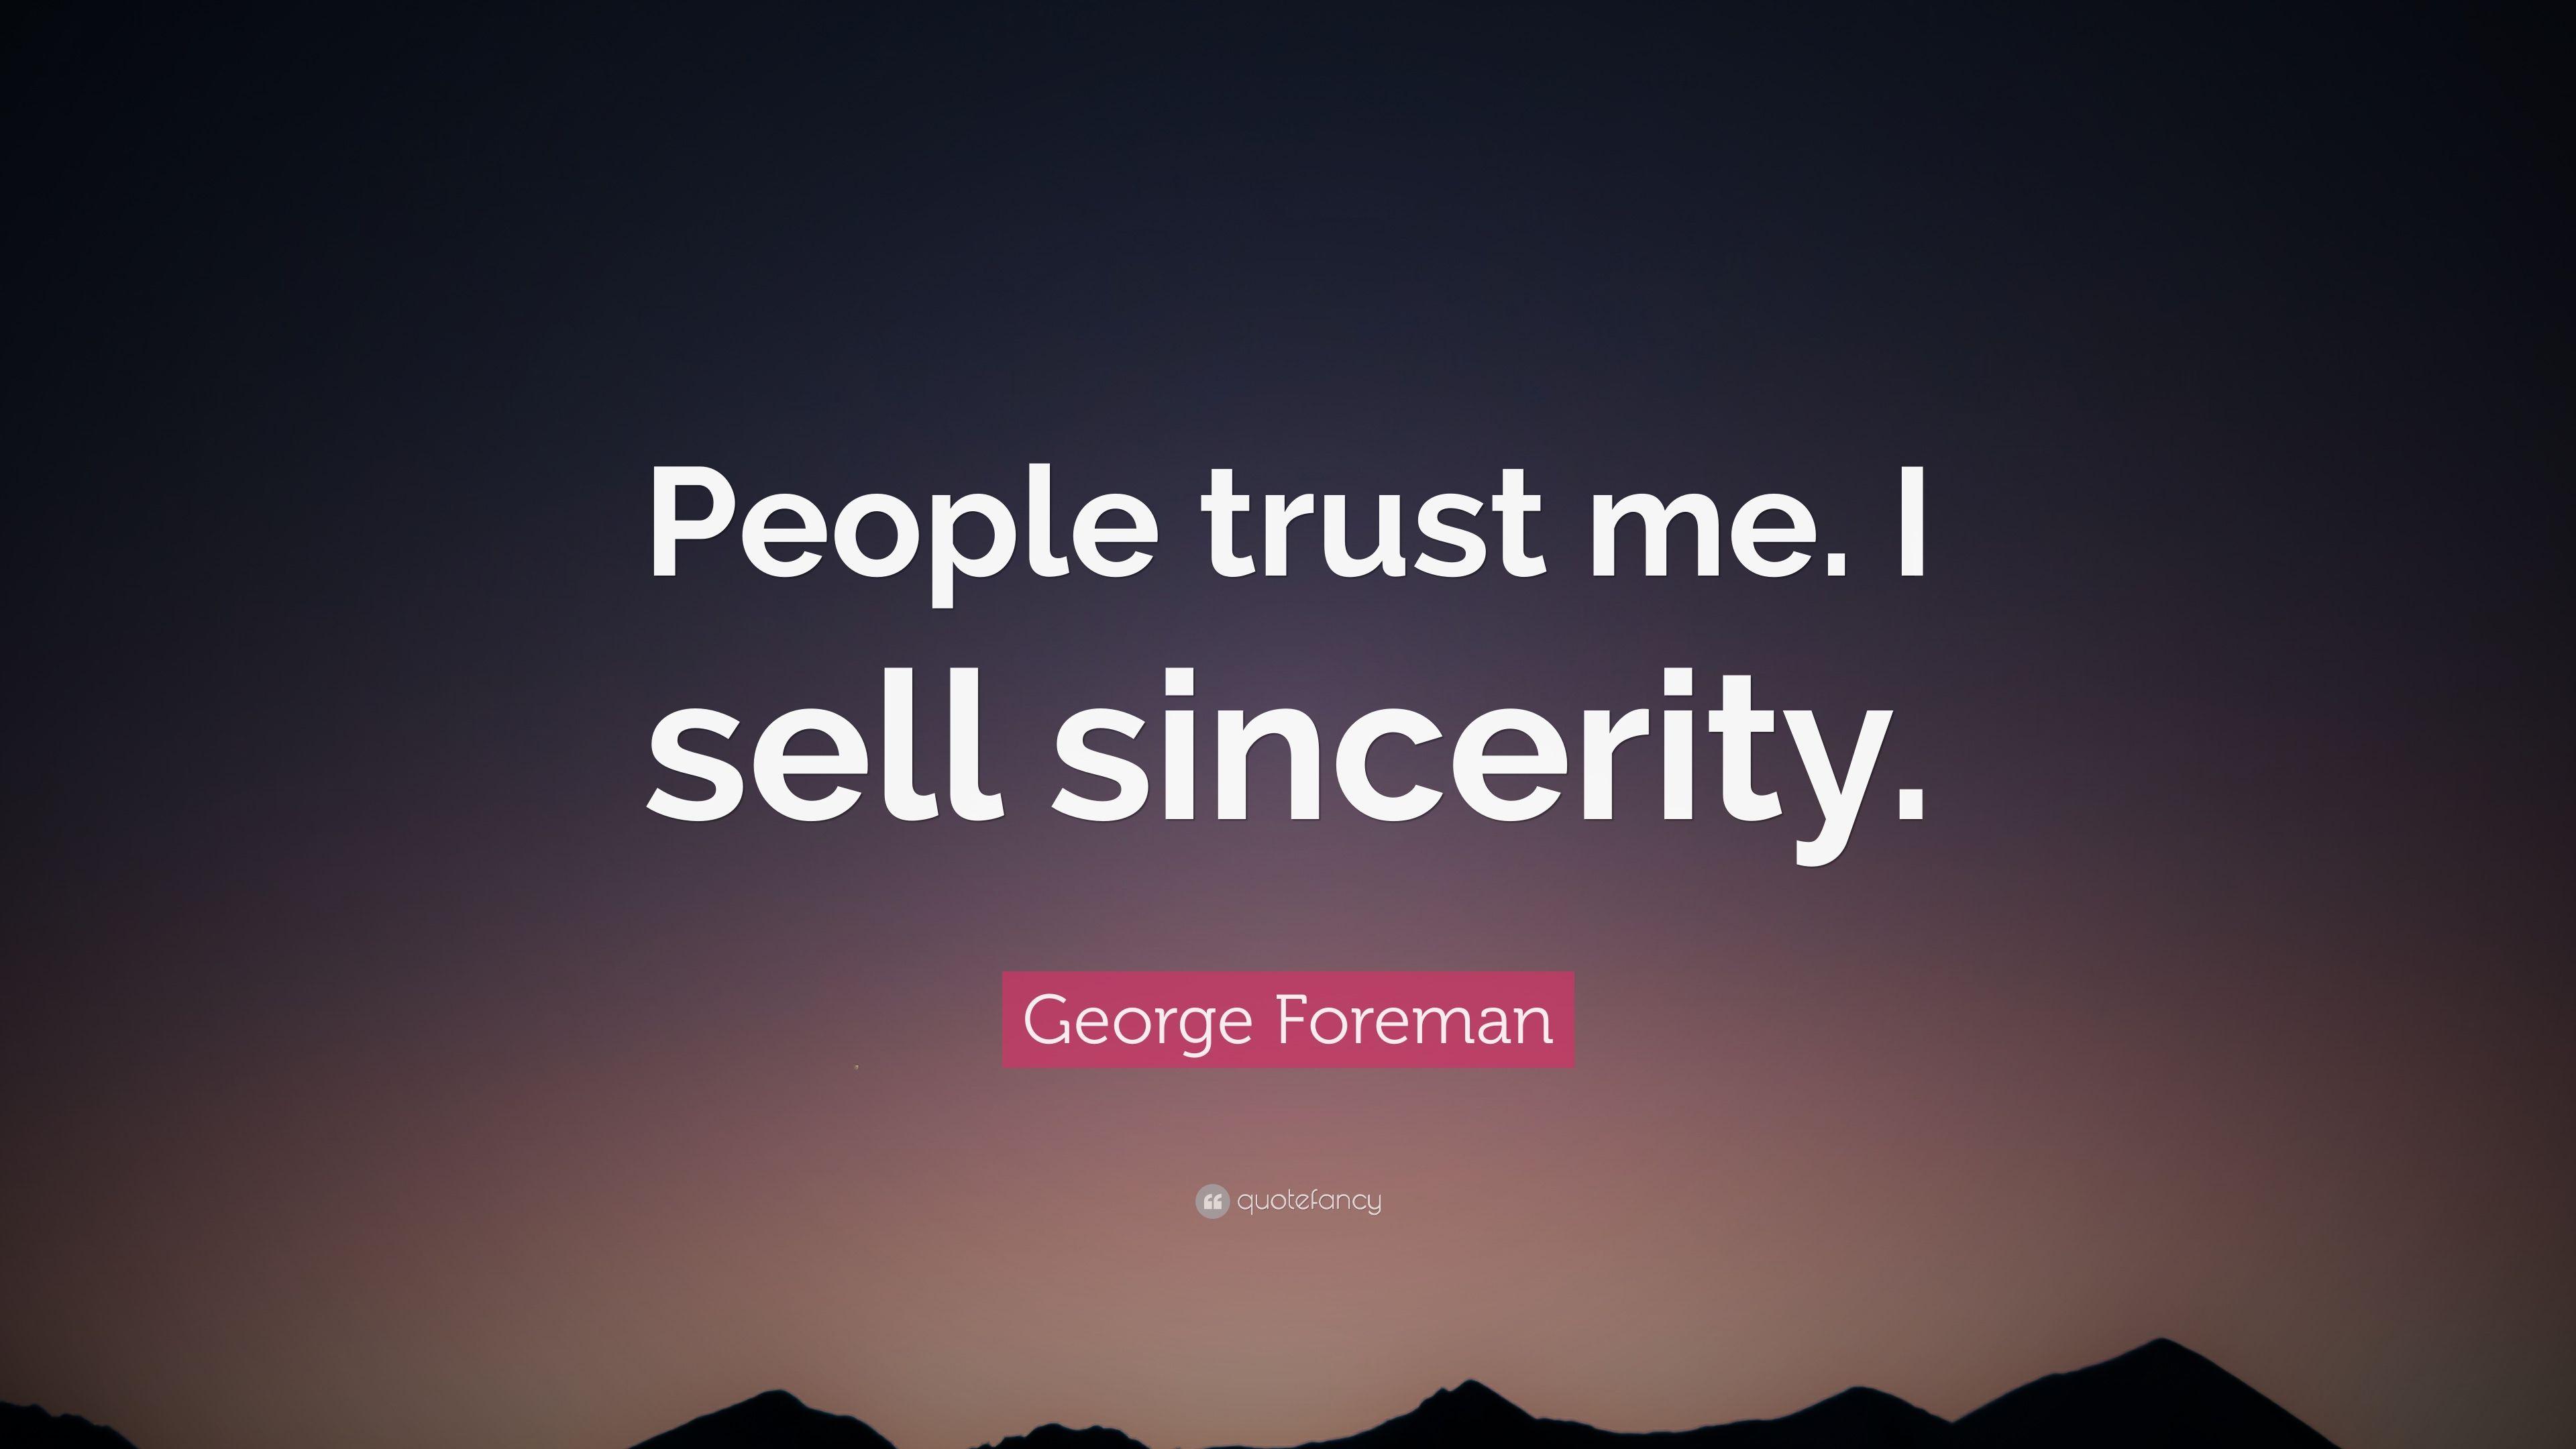 George Foreman Quote: “People trust me. I sell sincerity